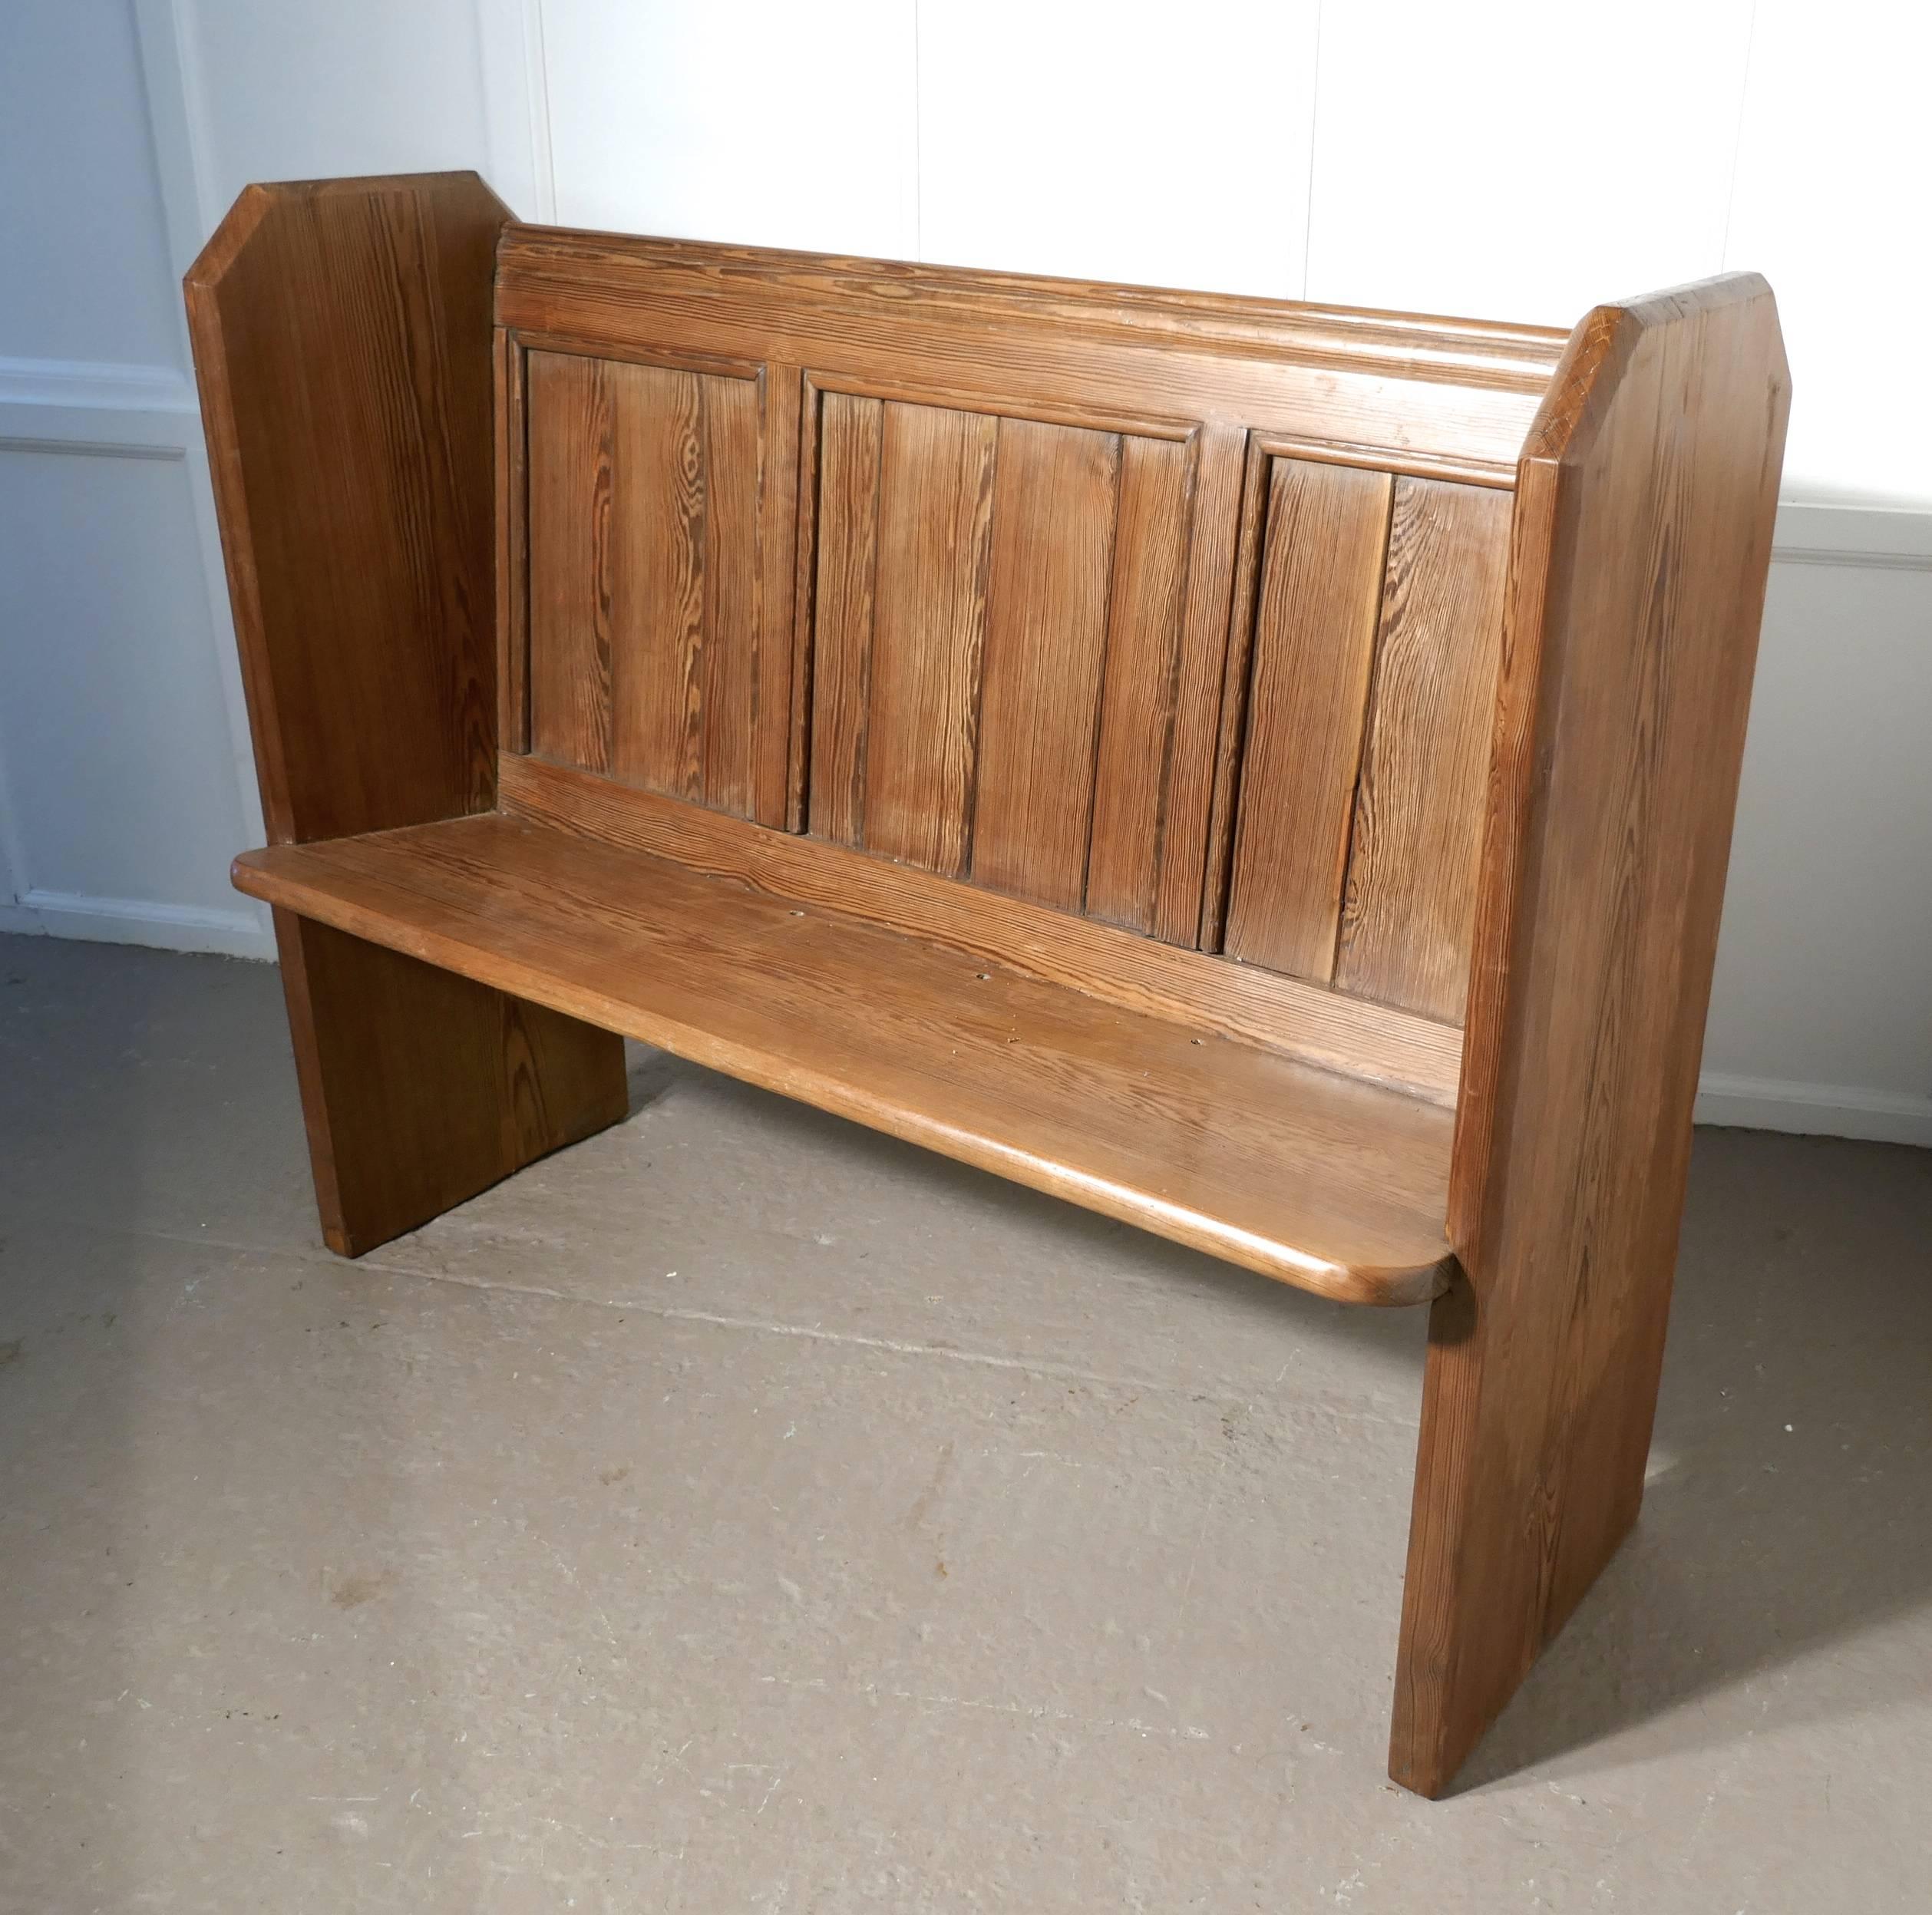 Late Victorian Victorian Pine Kitchen Bench or Church Pew